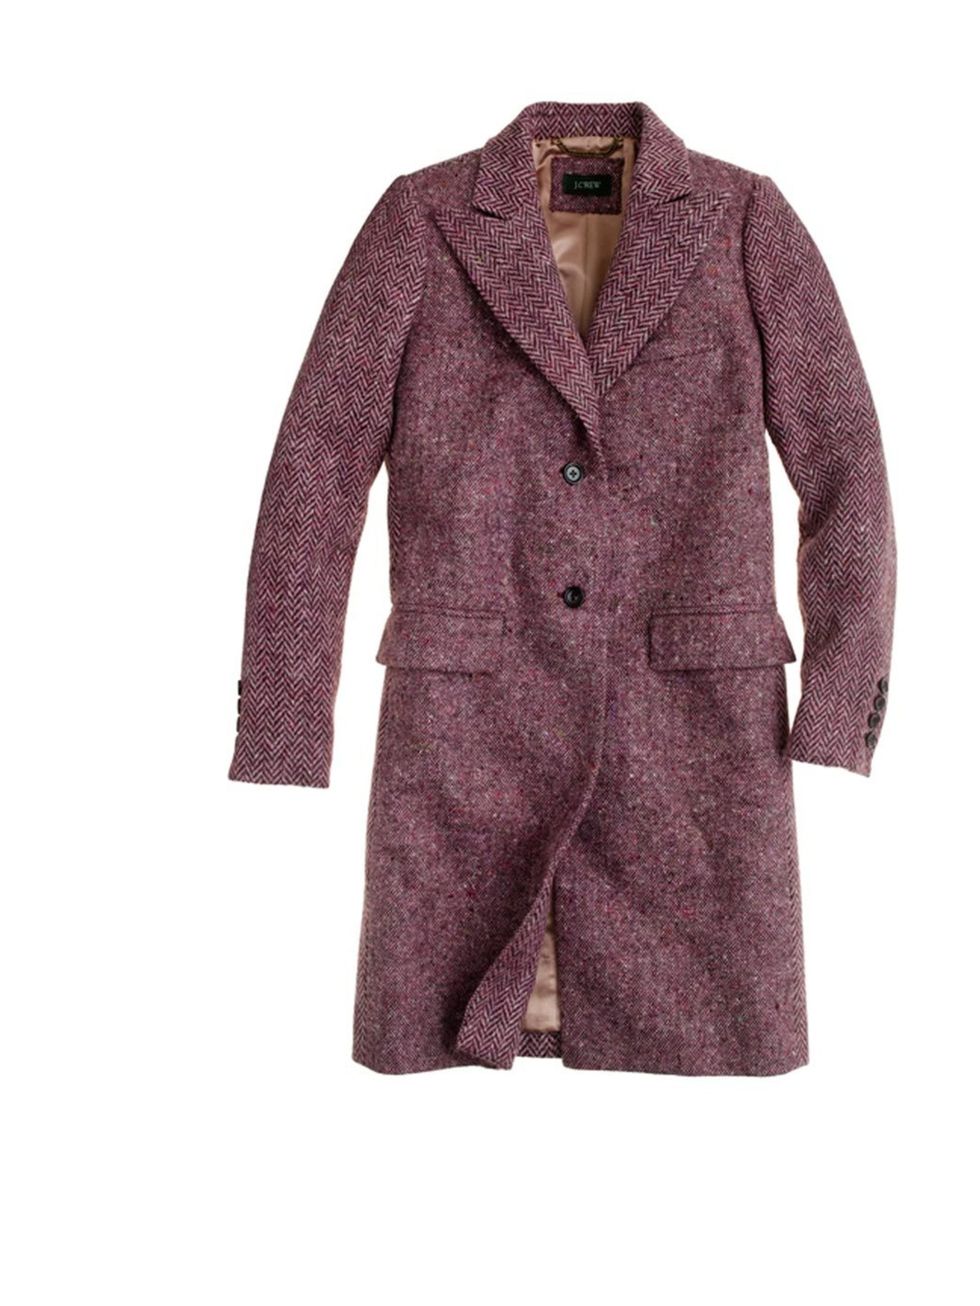 <p>An instant update on tweed- the pink colour brings this coat to life- we want!</p><p>J Crew coat, £550</p>